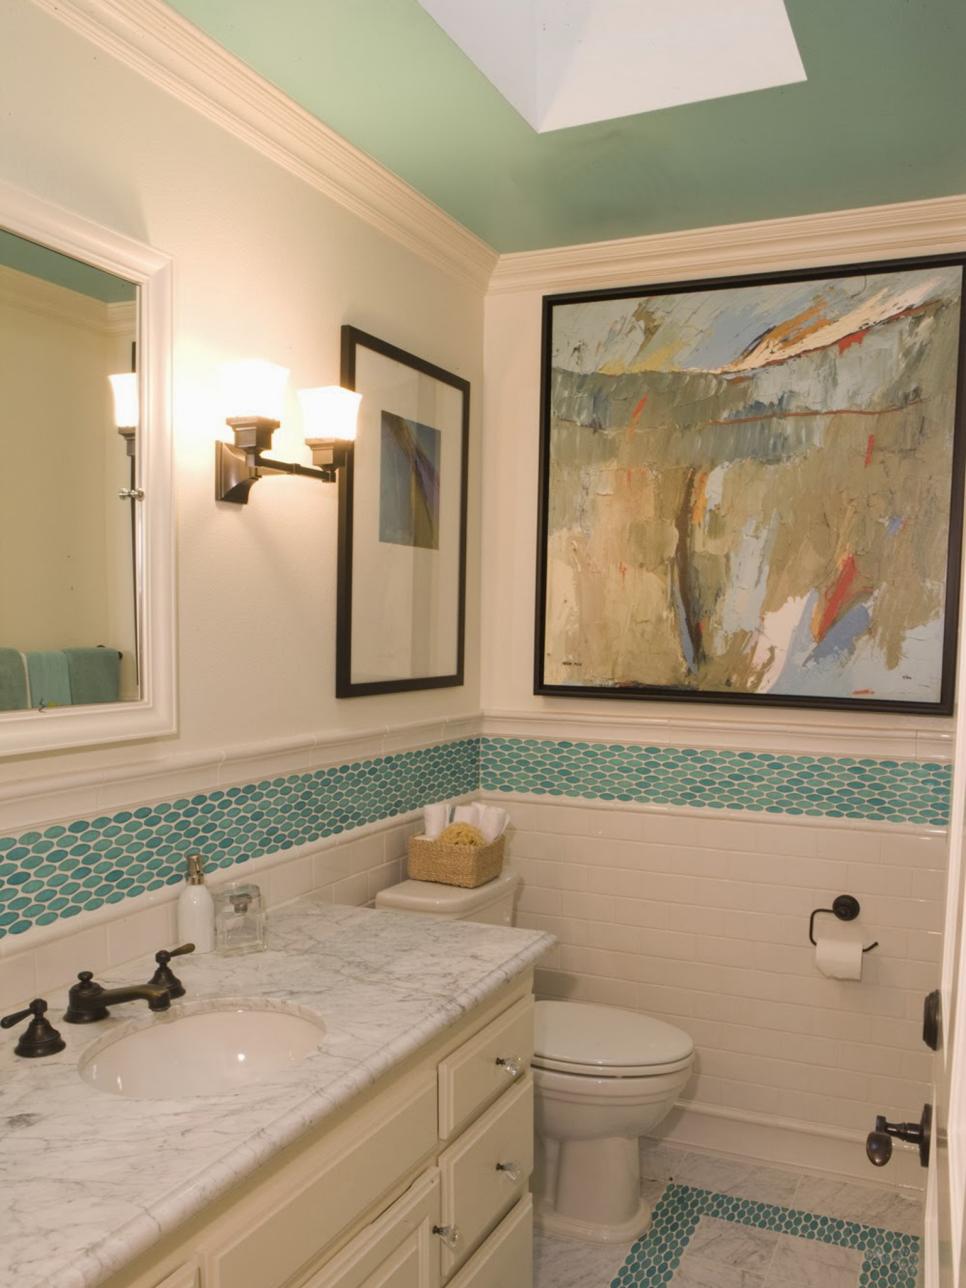 Transitional Blue Tile Bathroom With Skylight and Marble Countertops